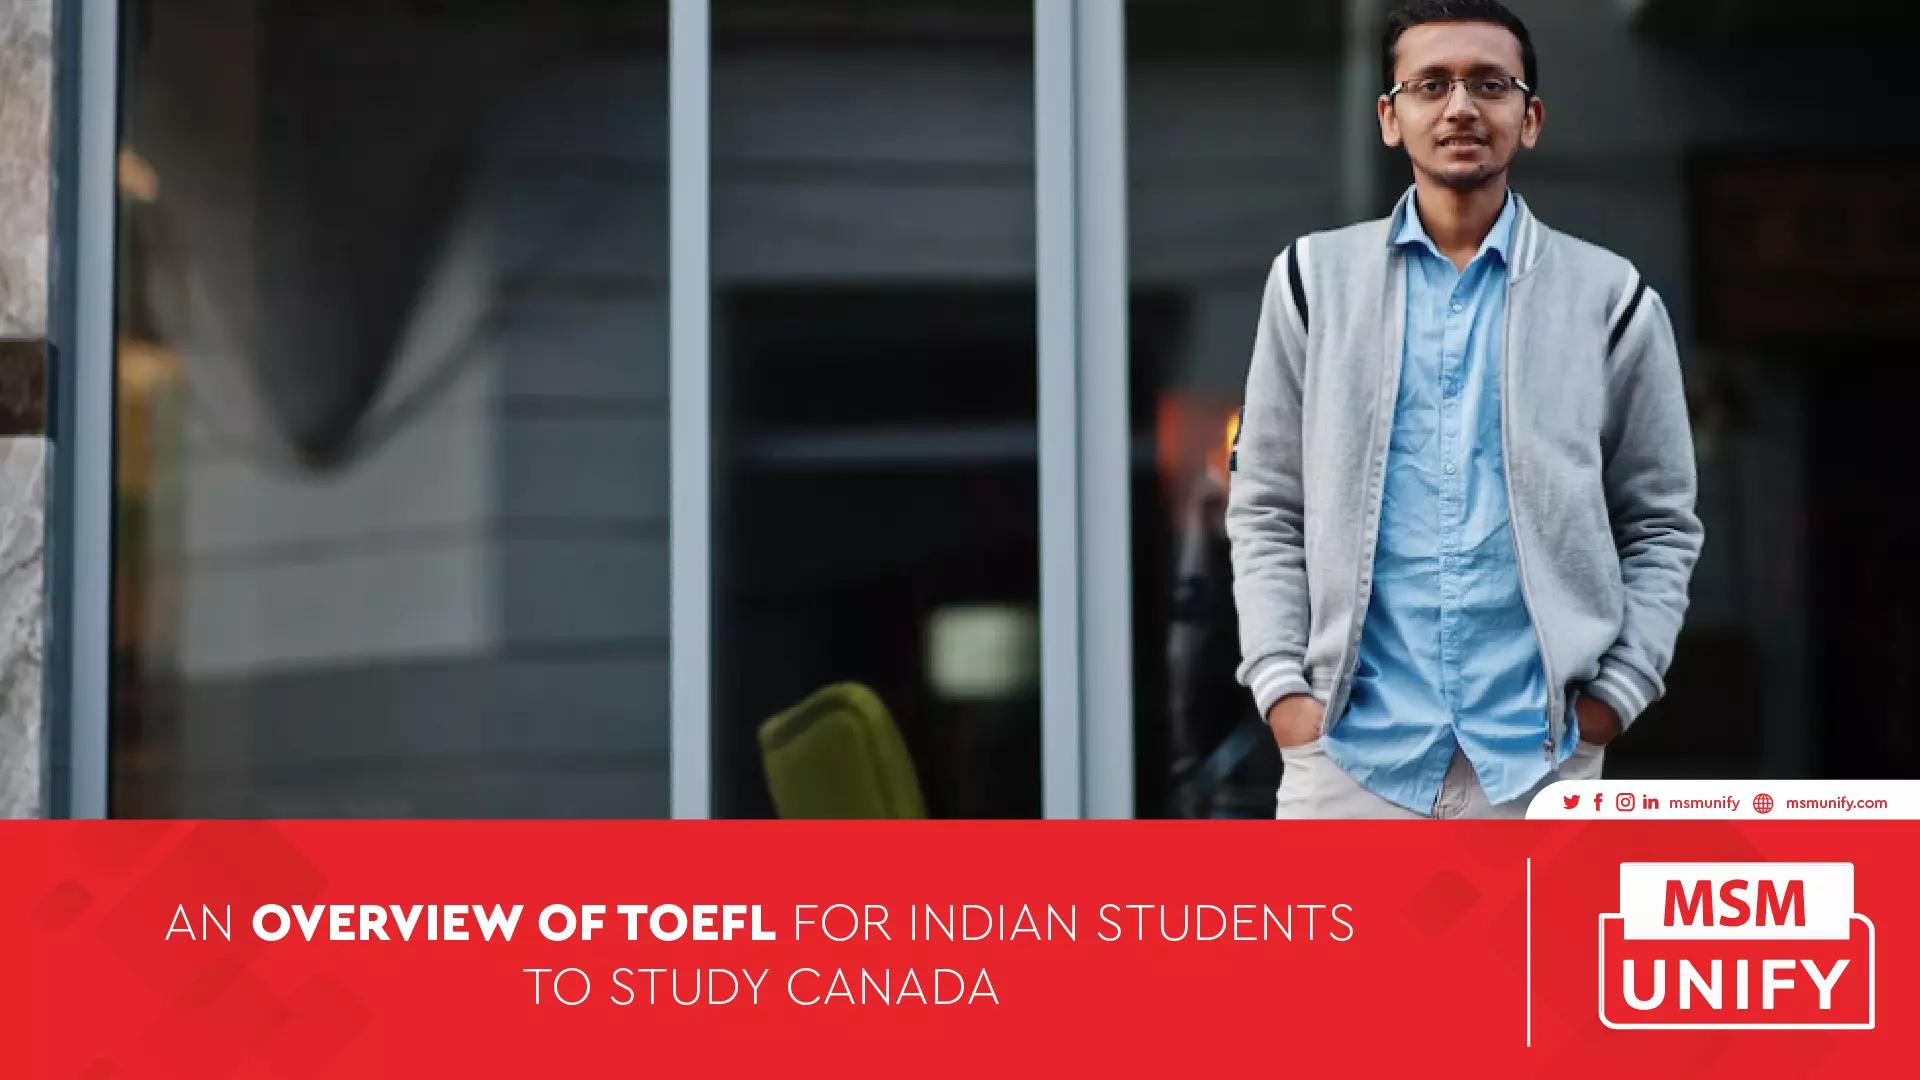 122822 MSM Unify An overview of TOEFL for Indian Students to Study in Canada 01